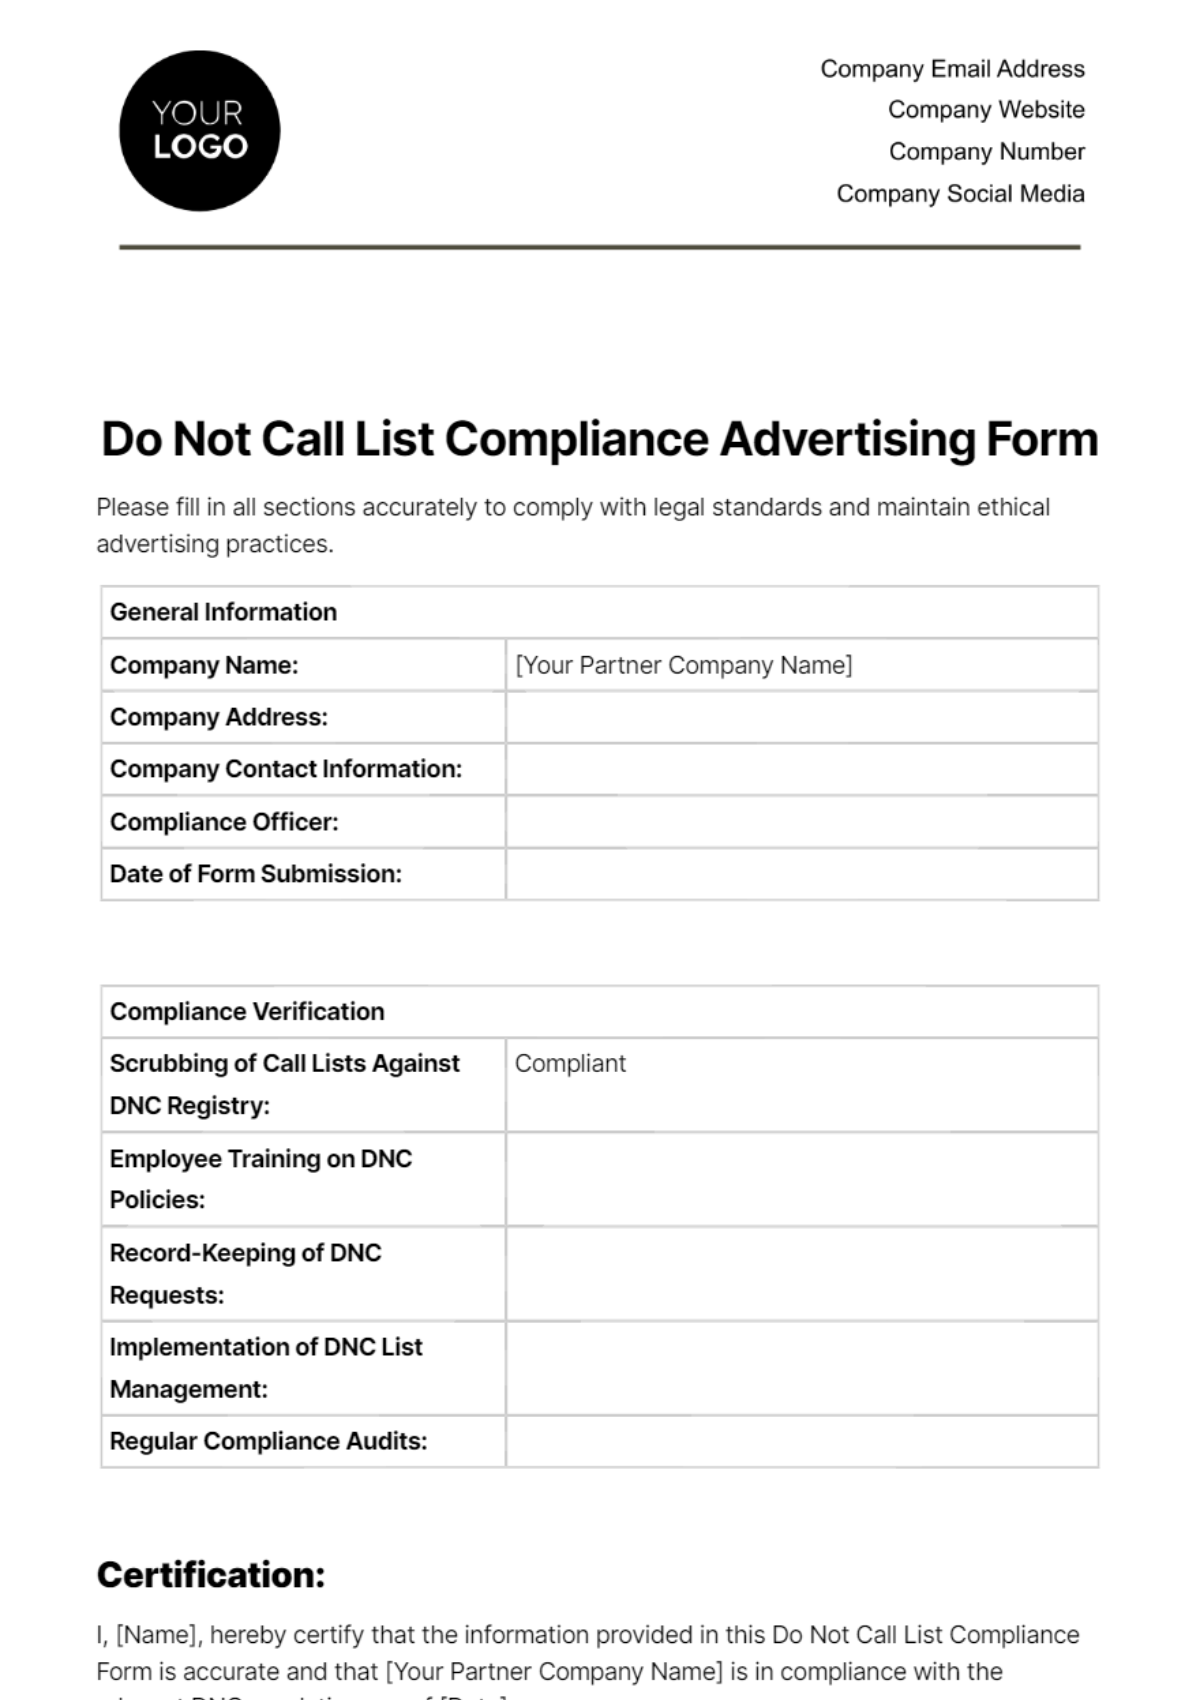 Do Not Call List Compliance Advertising Form Template